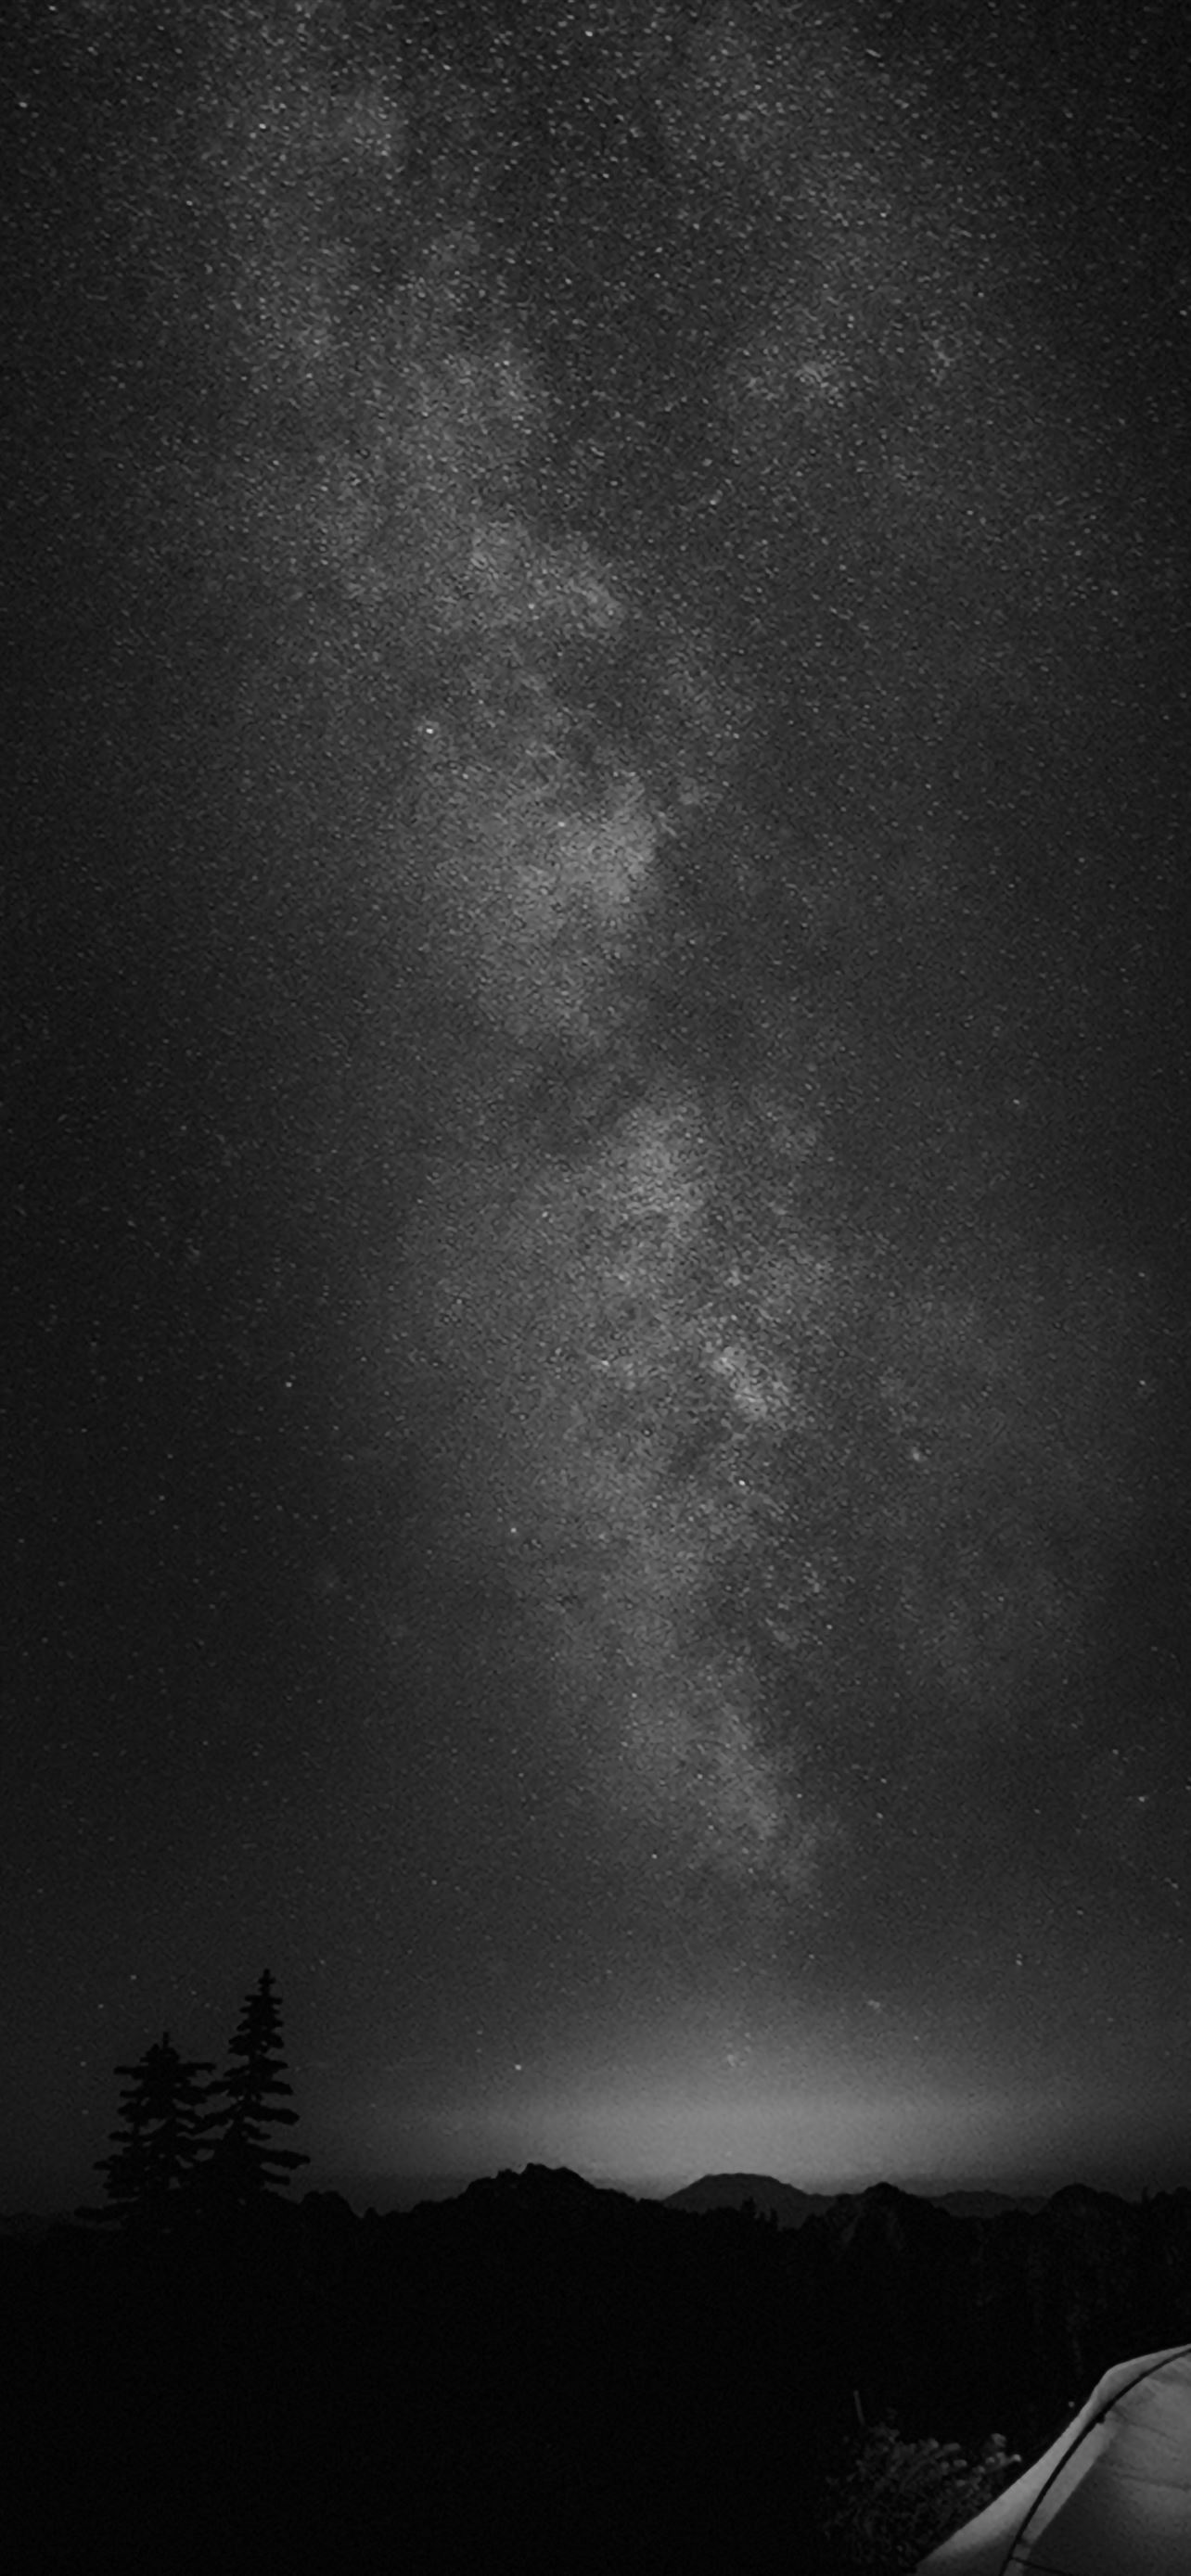 Black And White Picture Of Stars During Nighttime 4K 5K HD Galaxy Wallpapers   HD Wallpapers  ID 49692